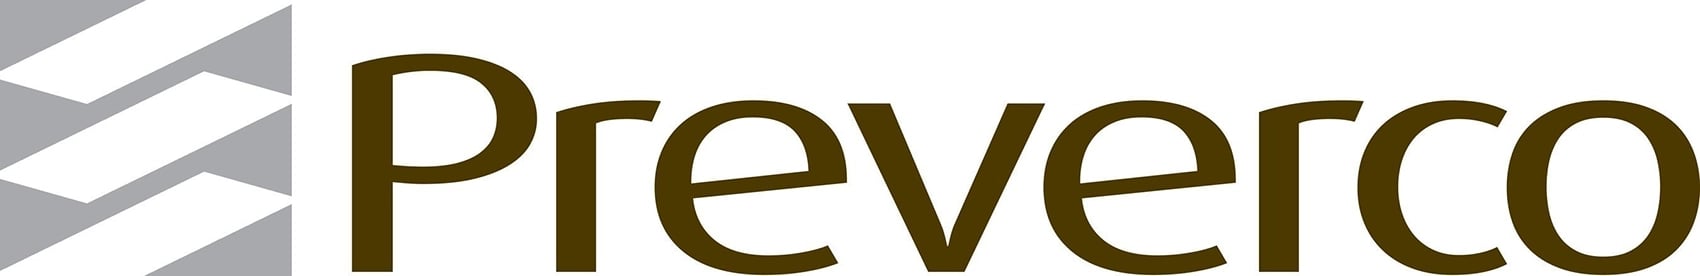 Logo of our client, Preverco flooring manufacturer in central Quebec, Canada